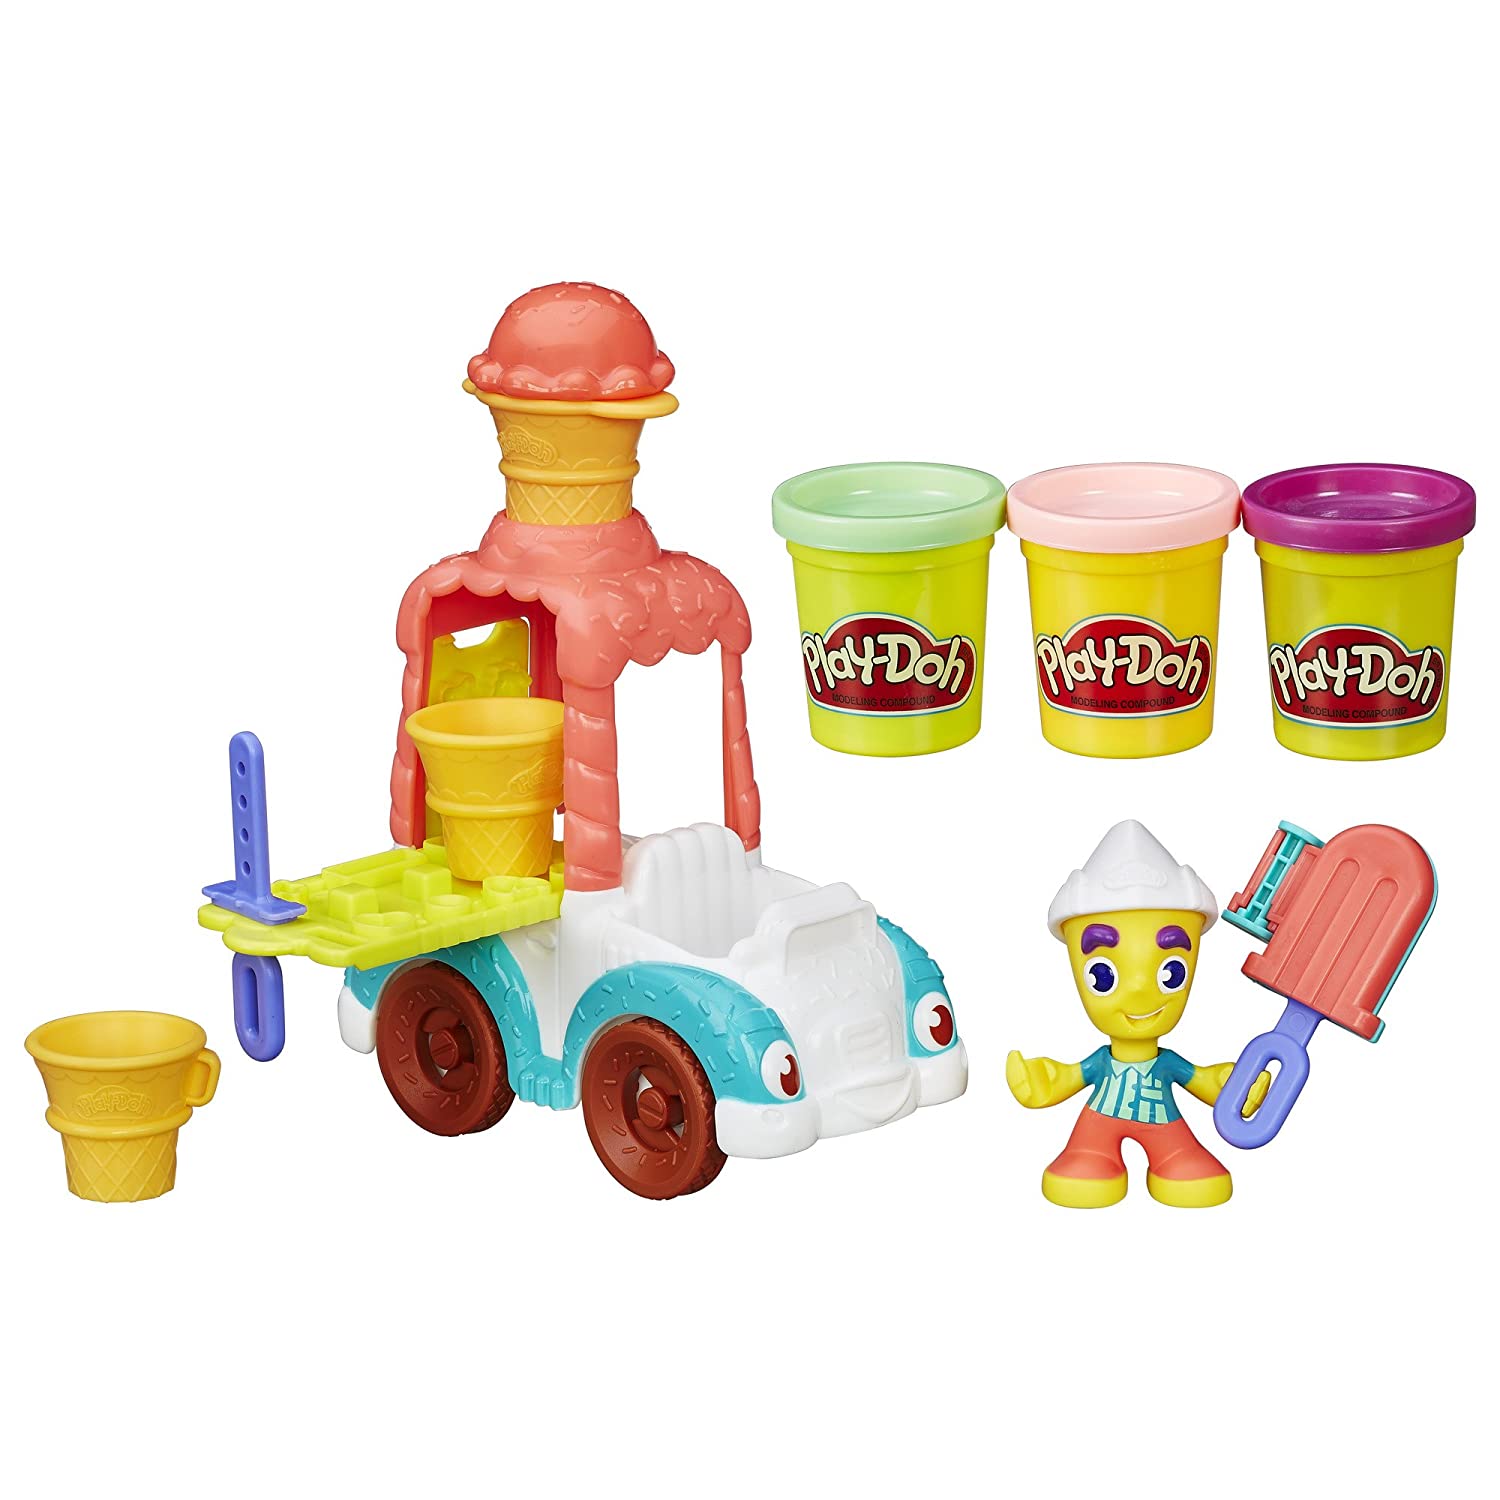 Top 8 Best Play Dough Sets for Boys Reviews in 2022 5